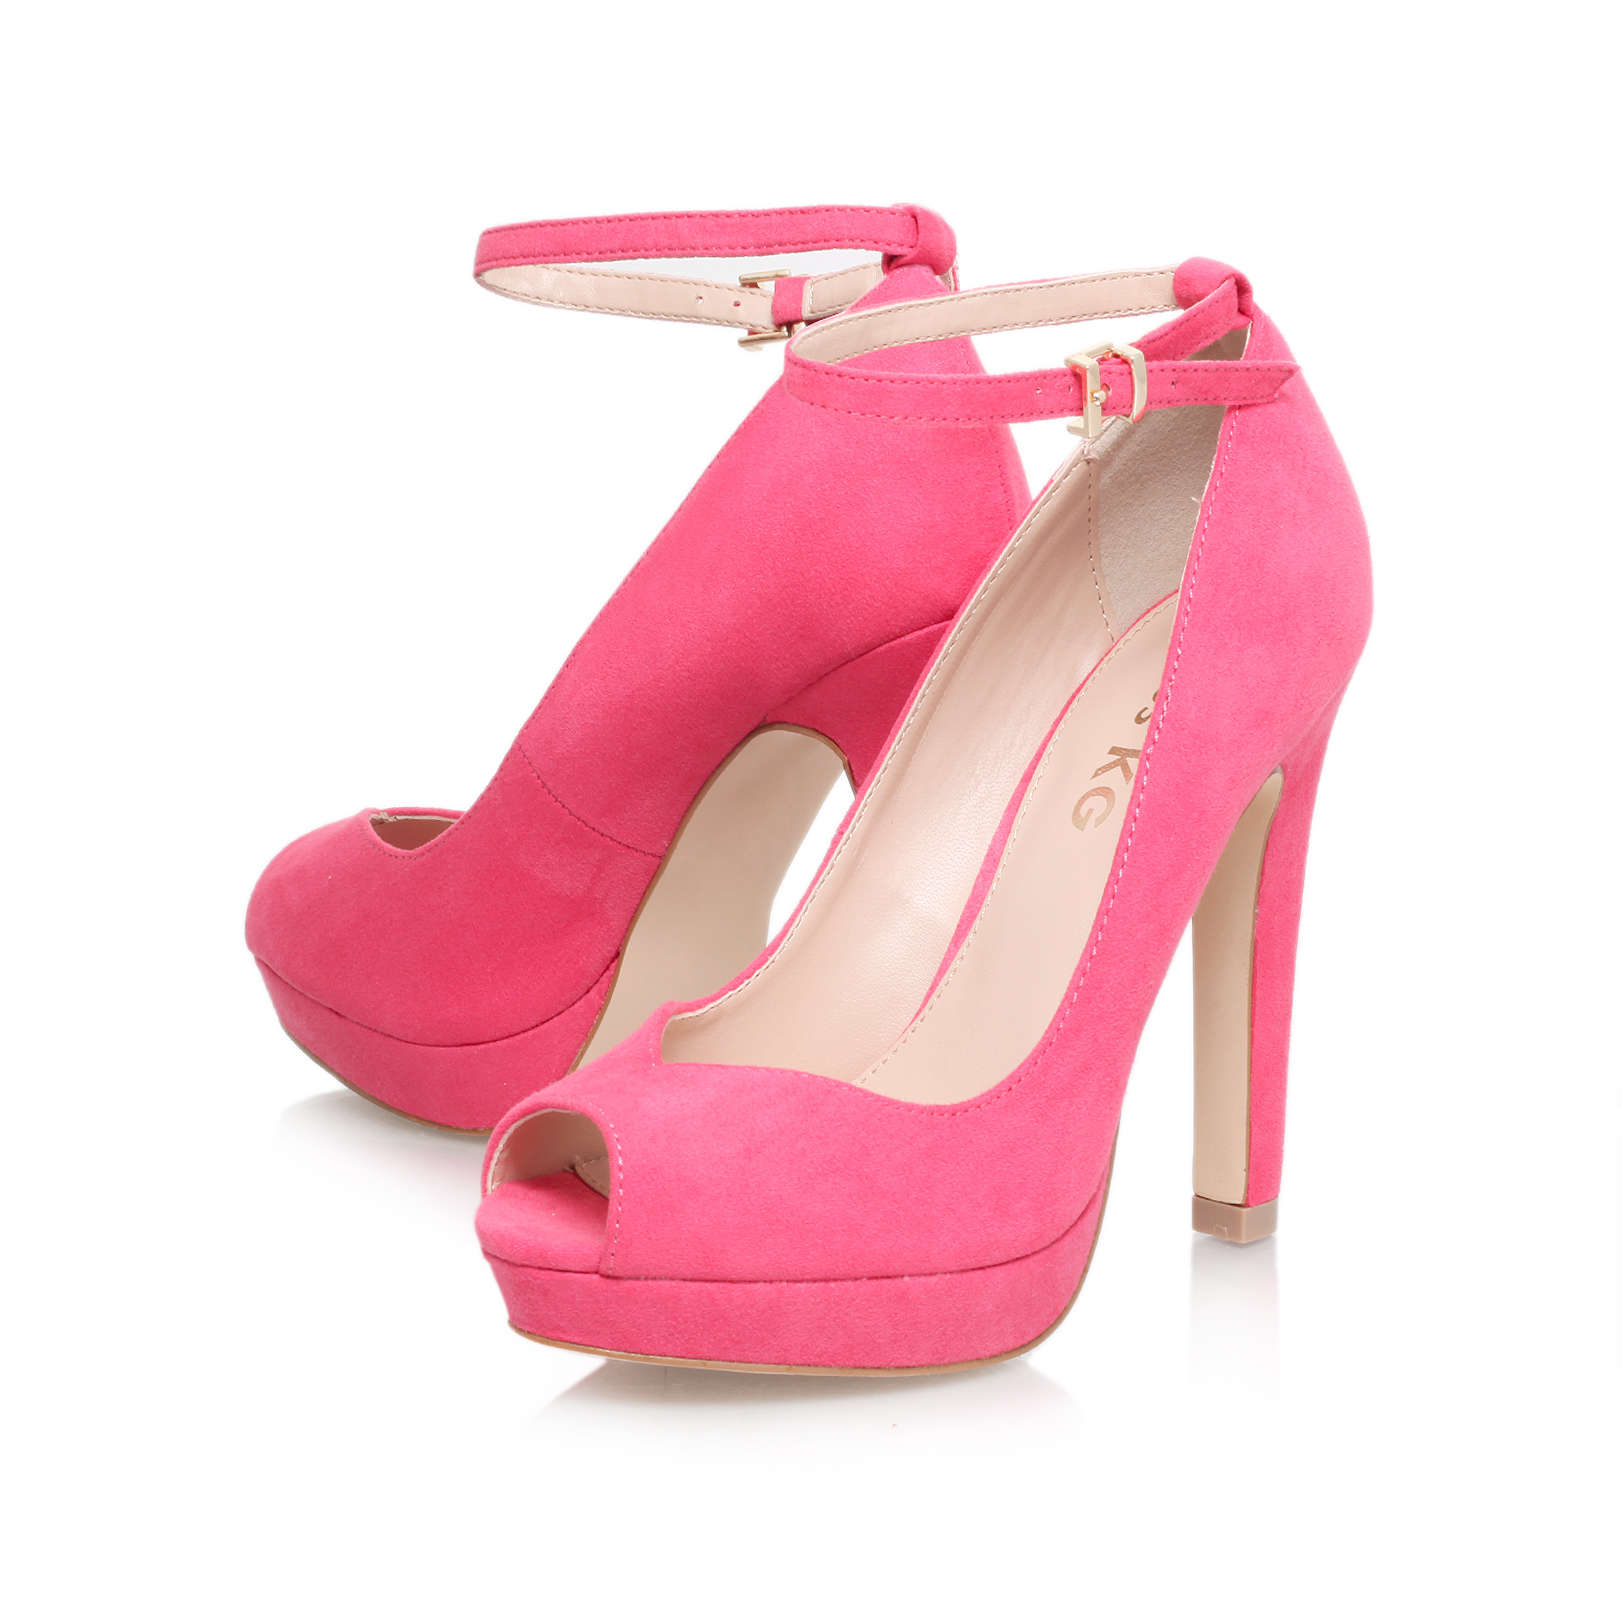 ANETE Miss KG Anete Pink High Heel Court Shoes by MISS KG